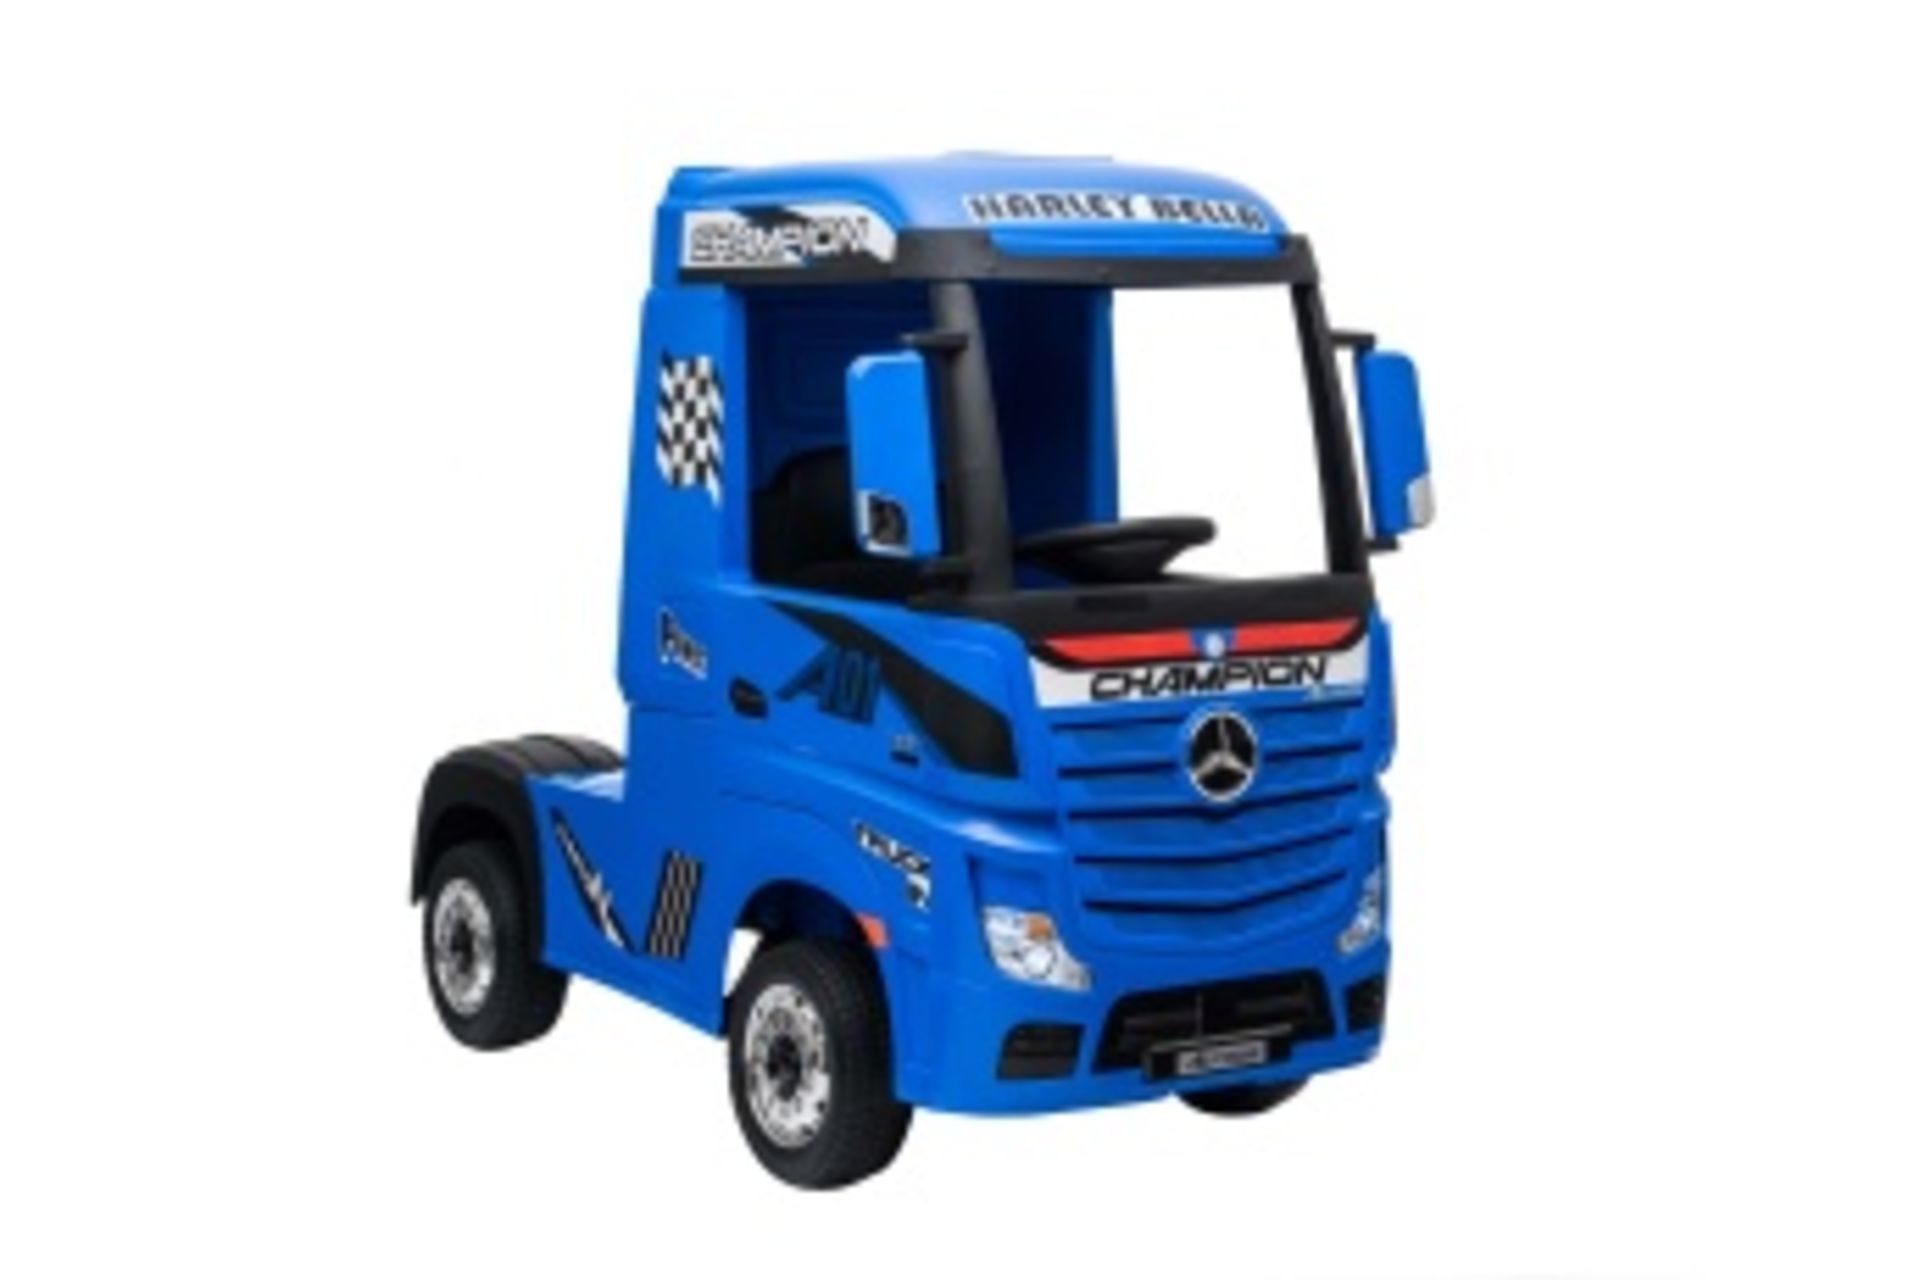 RIDE ON FULLY LICENCED MERCEDES BENZ ACTROS TRUCK 24V COMPLETE WITH OFFICIAL TRAILER - BLUE - Image 13 of 13